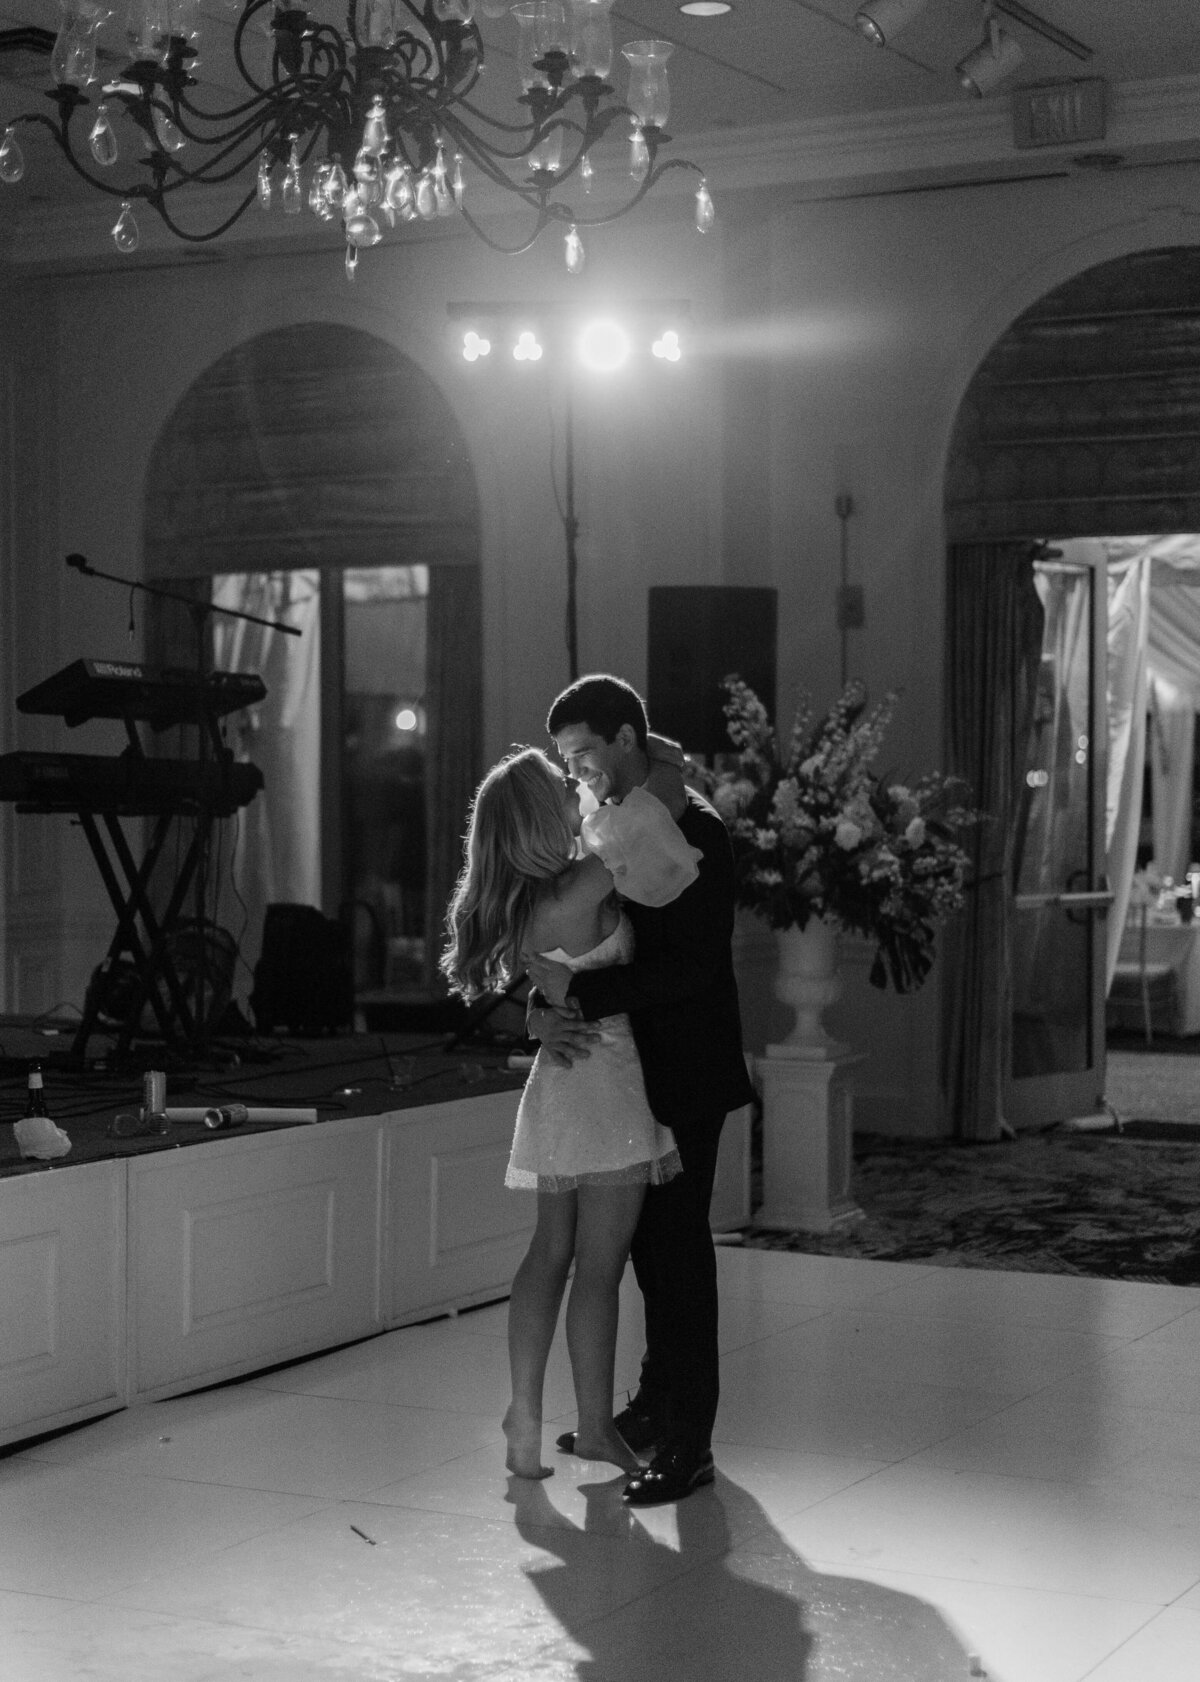 A husband and wife share a final dance at their wedding.